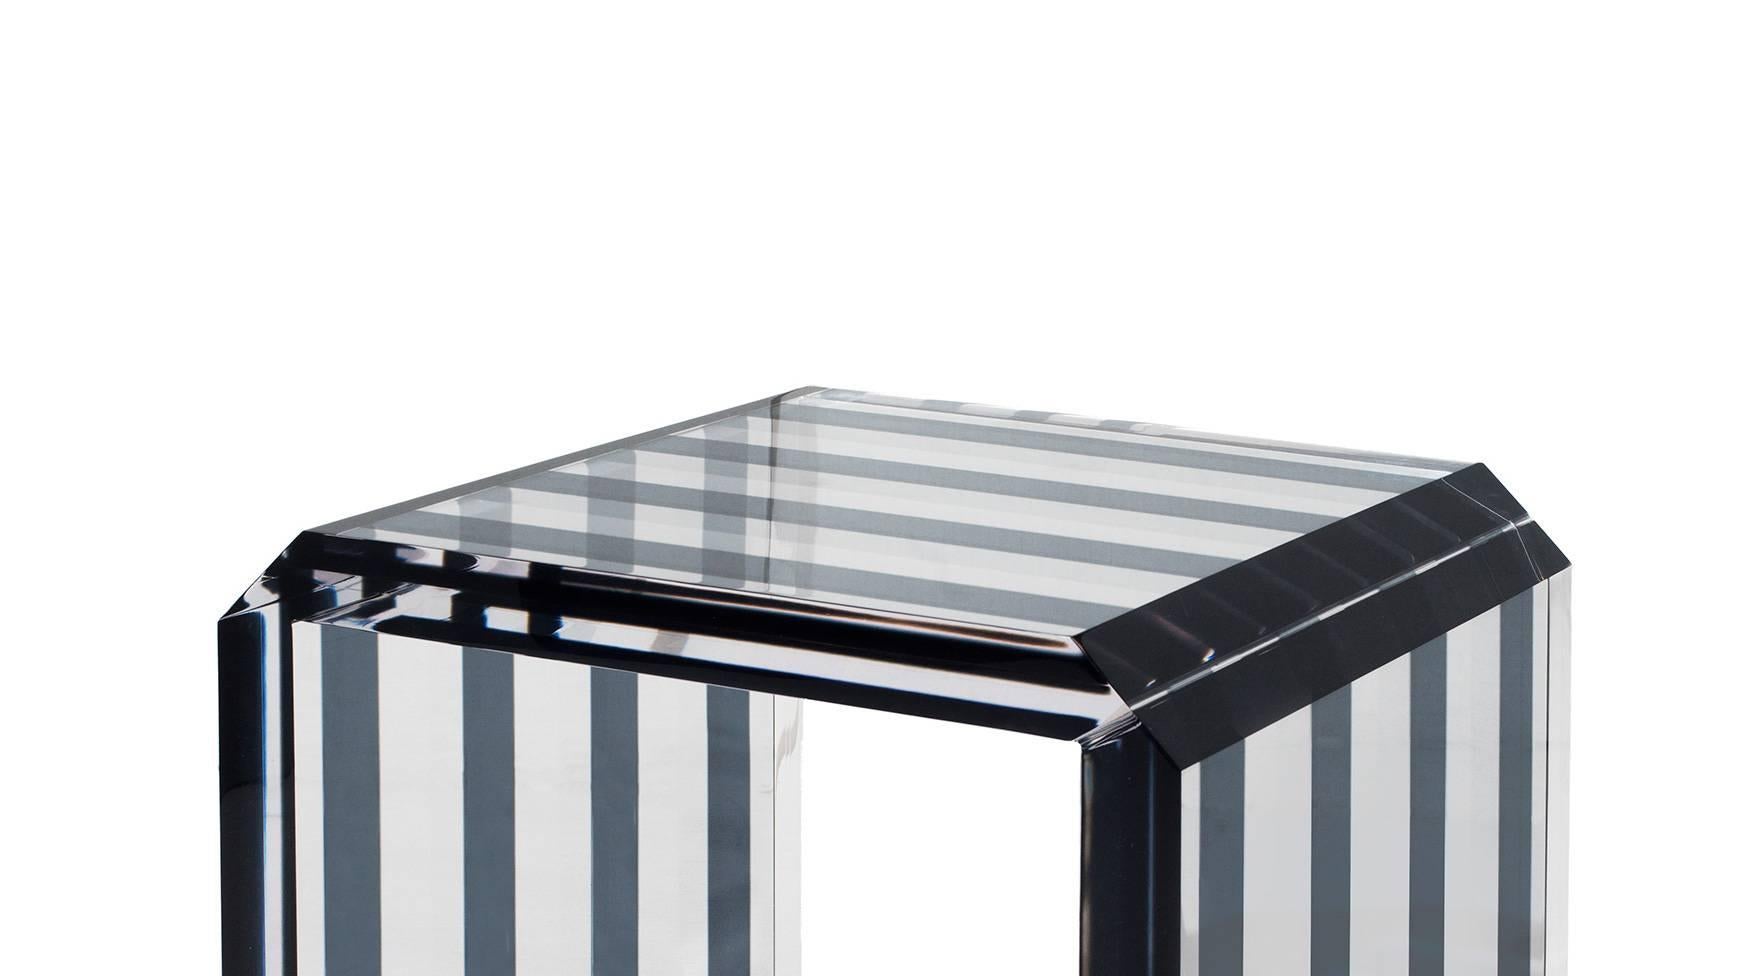 A beautiful black and transparent plexiglass table designed and produced by Studio Superego in 2015. 

Biography
Superego editions was born in 2006, performing a constant activity of research in decorative arts by offering both contemporary and